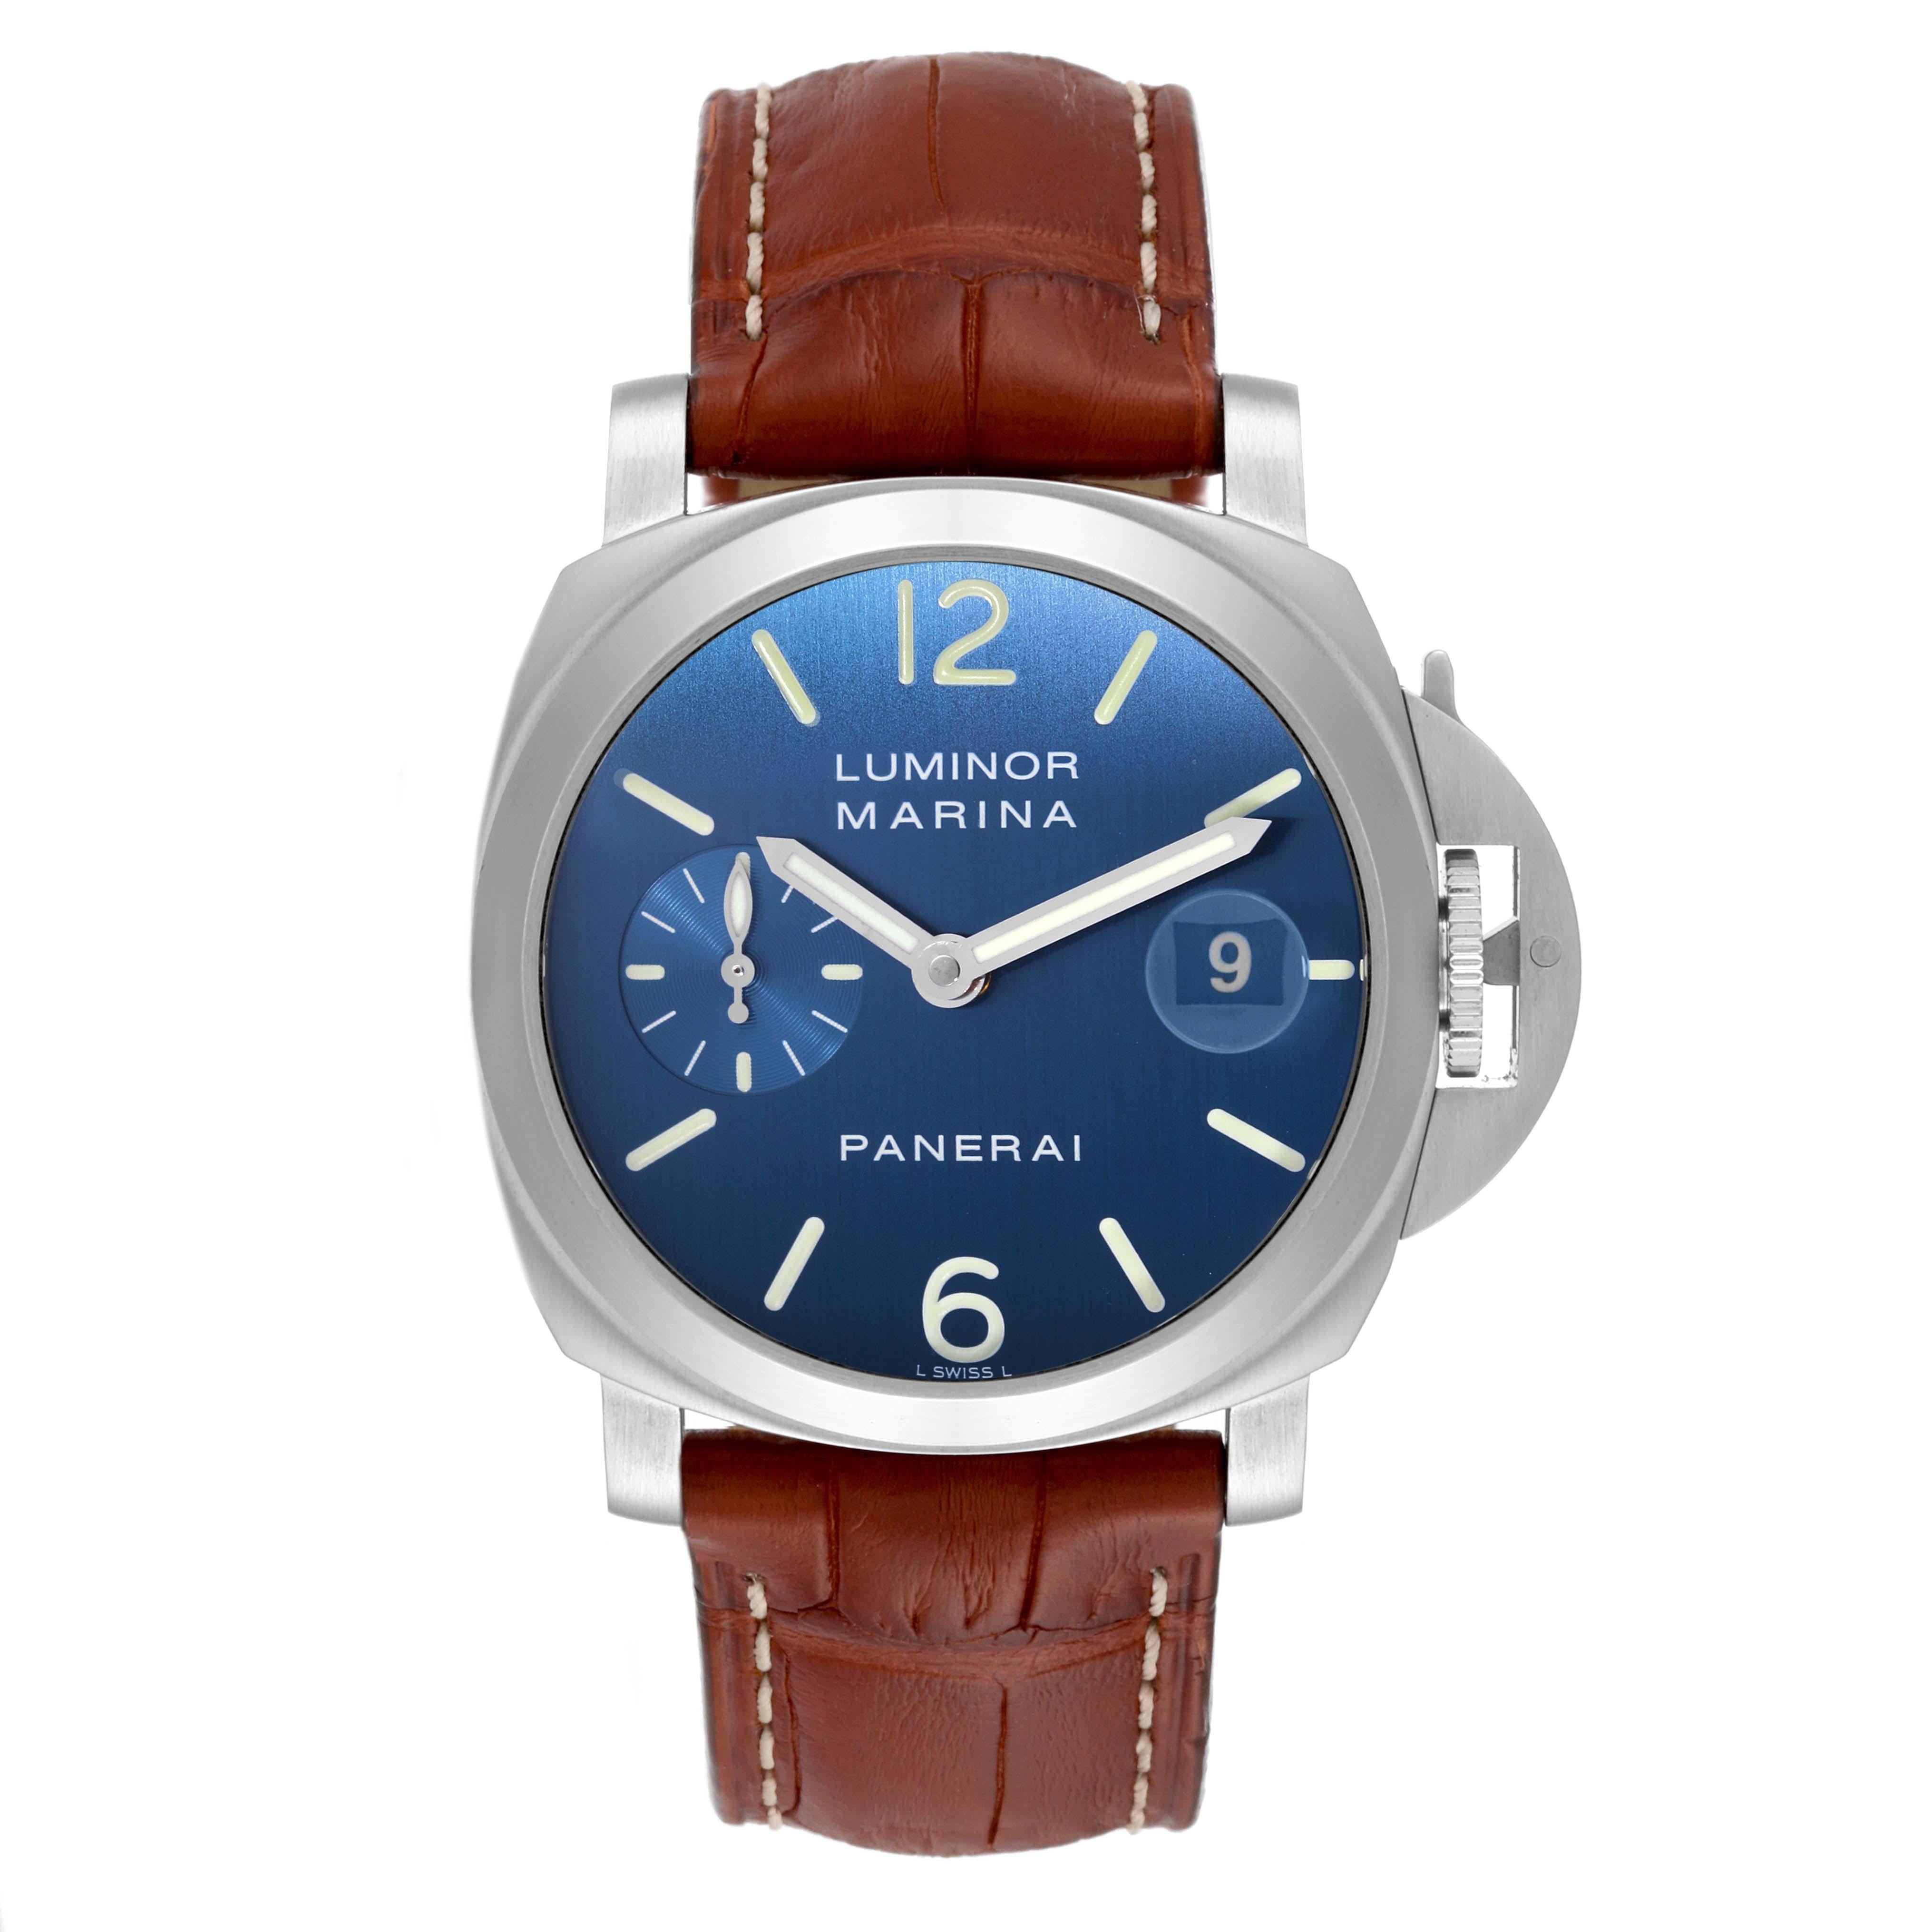 Panerai Luminor Marina Blue Dial Steel Mens Watch PAM00070. Automatic self-winding movement. Two part cushion shaped stainless steel case 40.0 mm in diameter. Panerai patented crown protector. Polished stainless steel sloped bezel. Scratch resistant